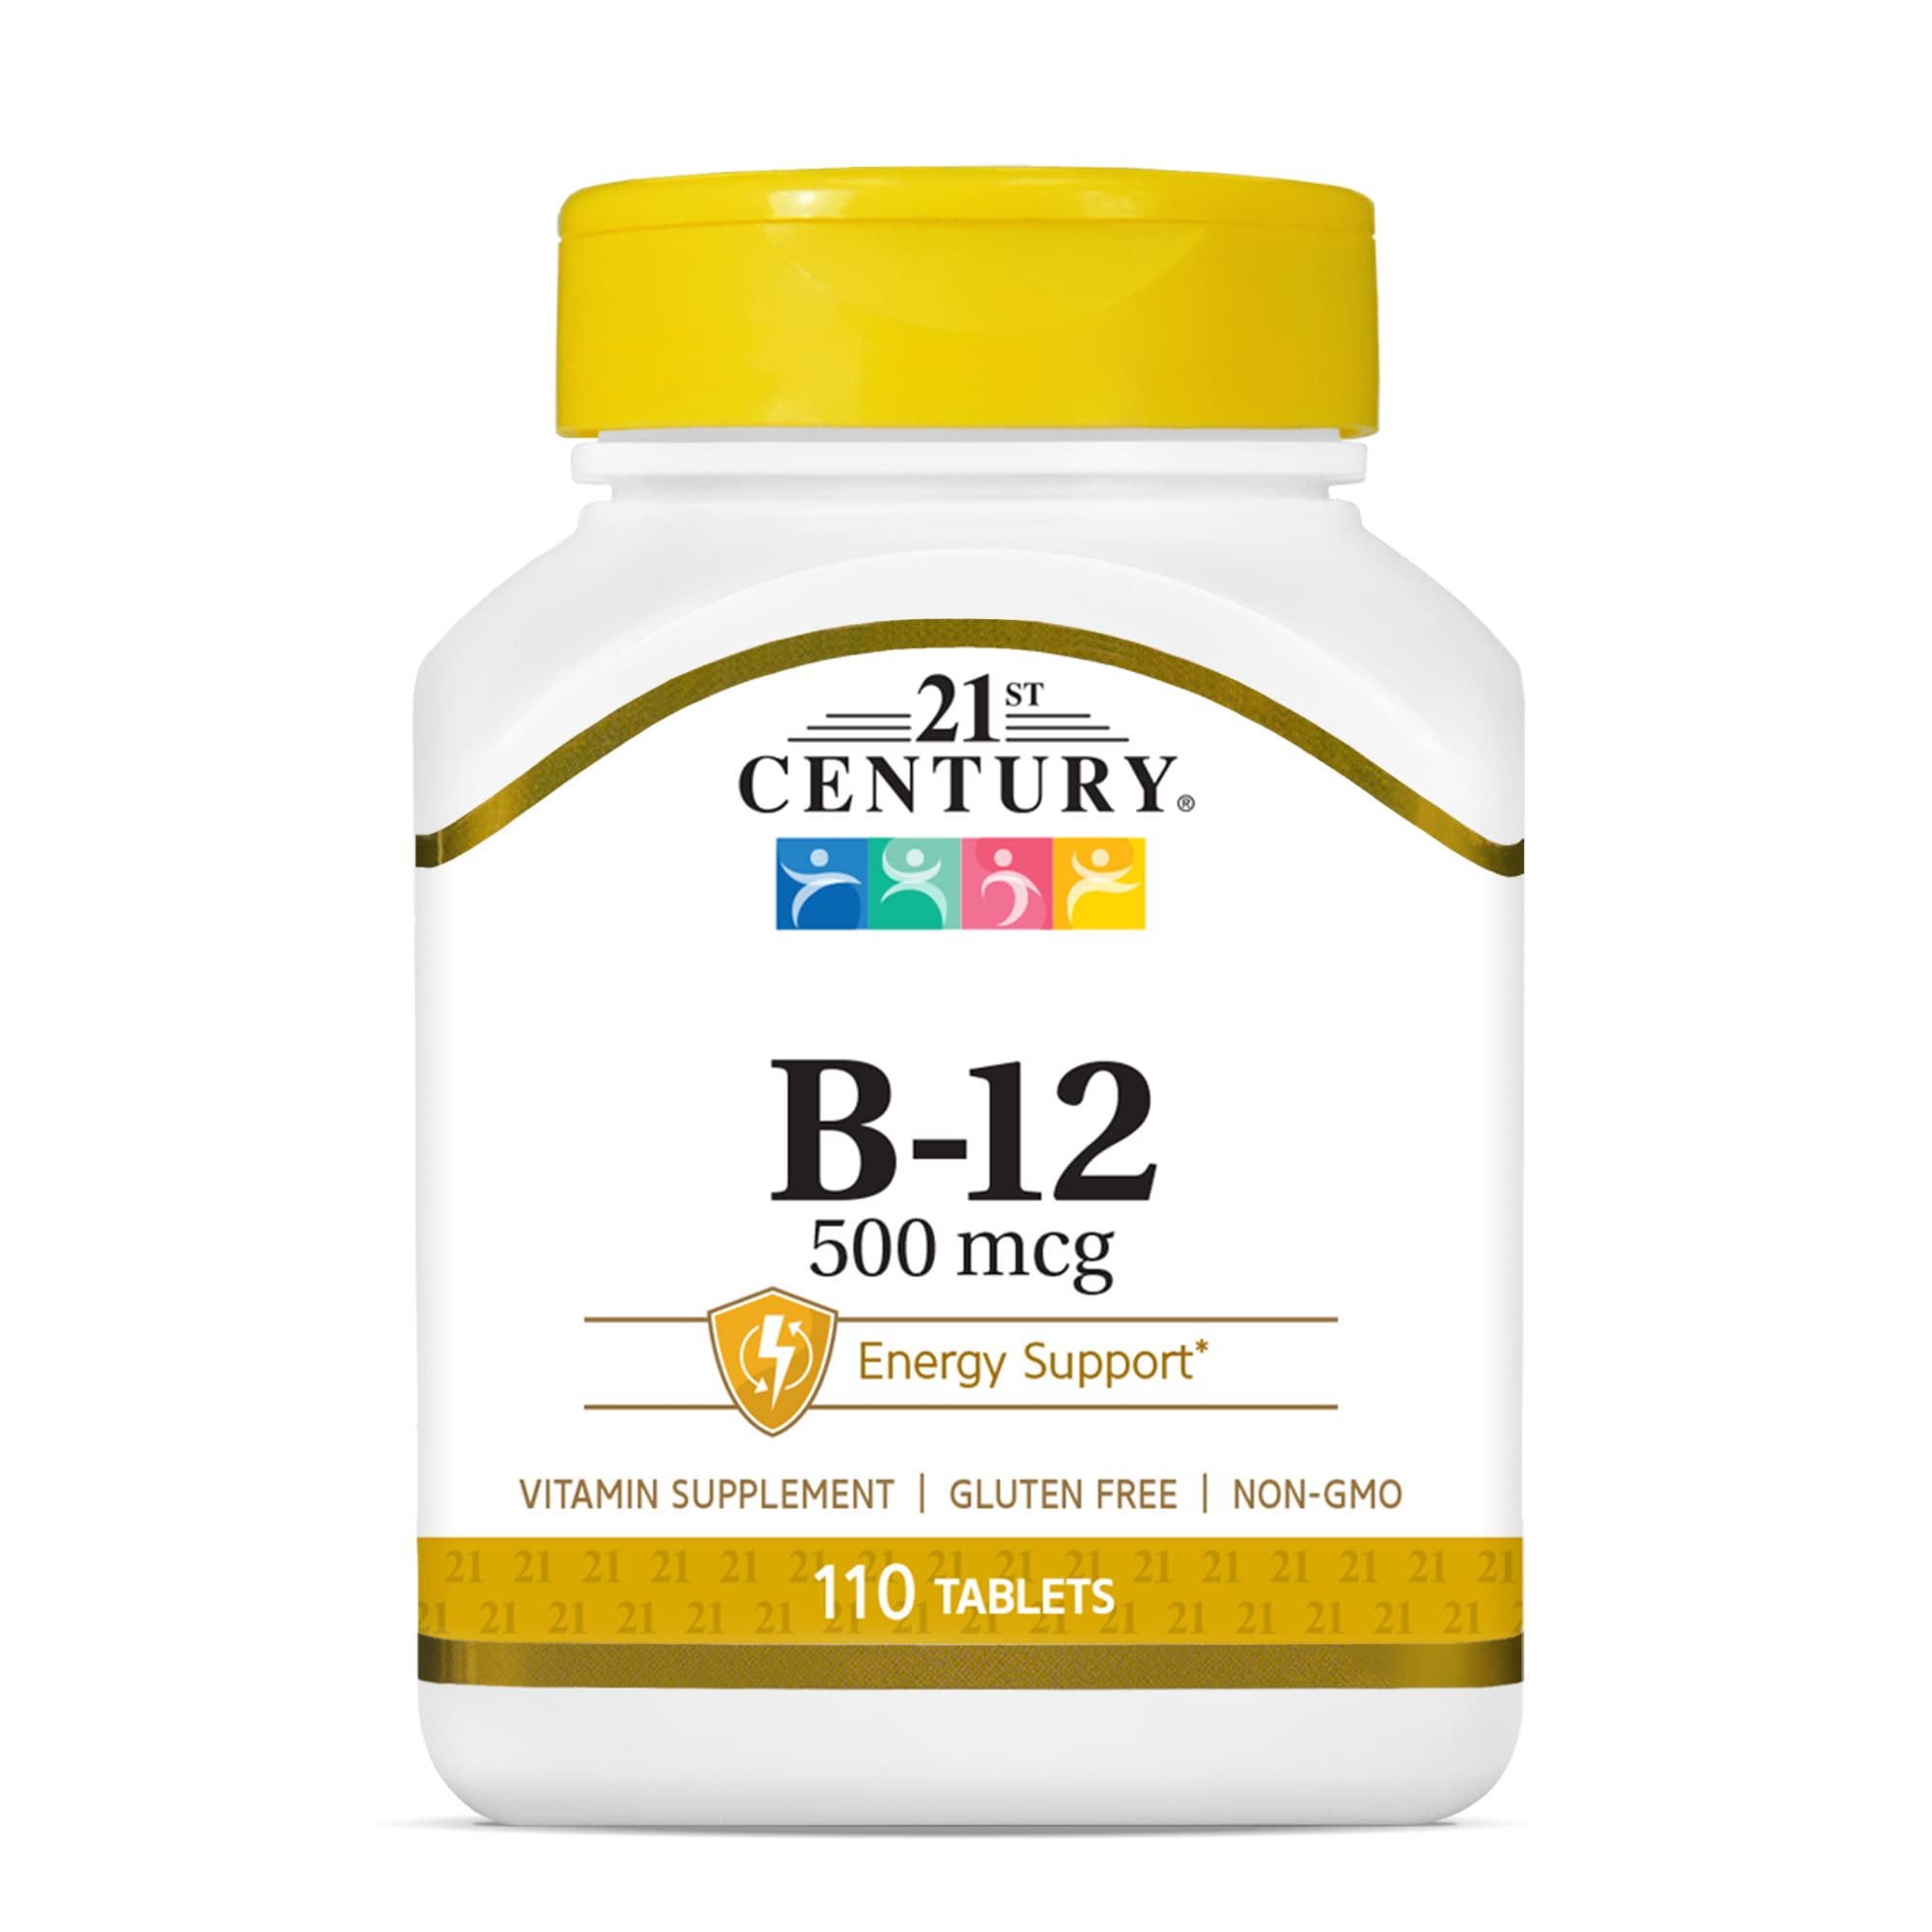 21st Century B-12 500 mcg Tablets, 110-Count (Pack of 2)